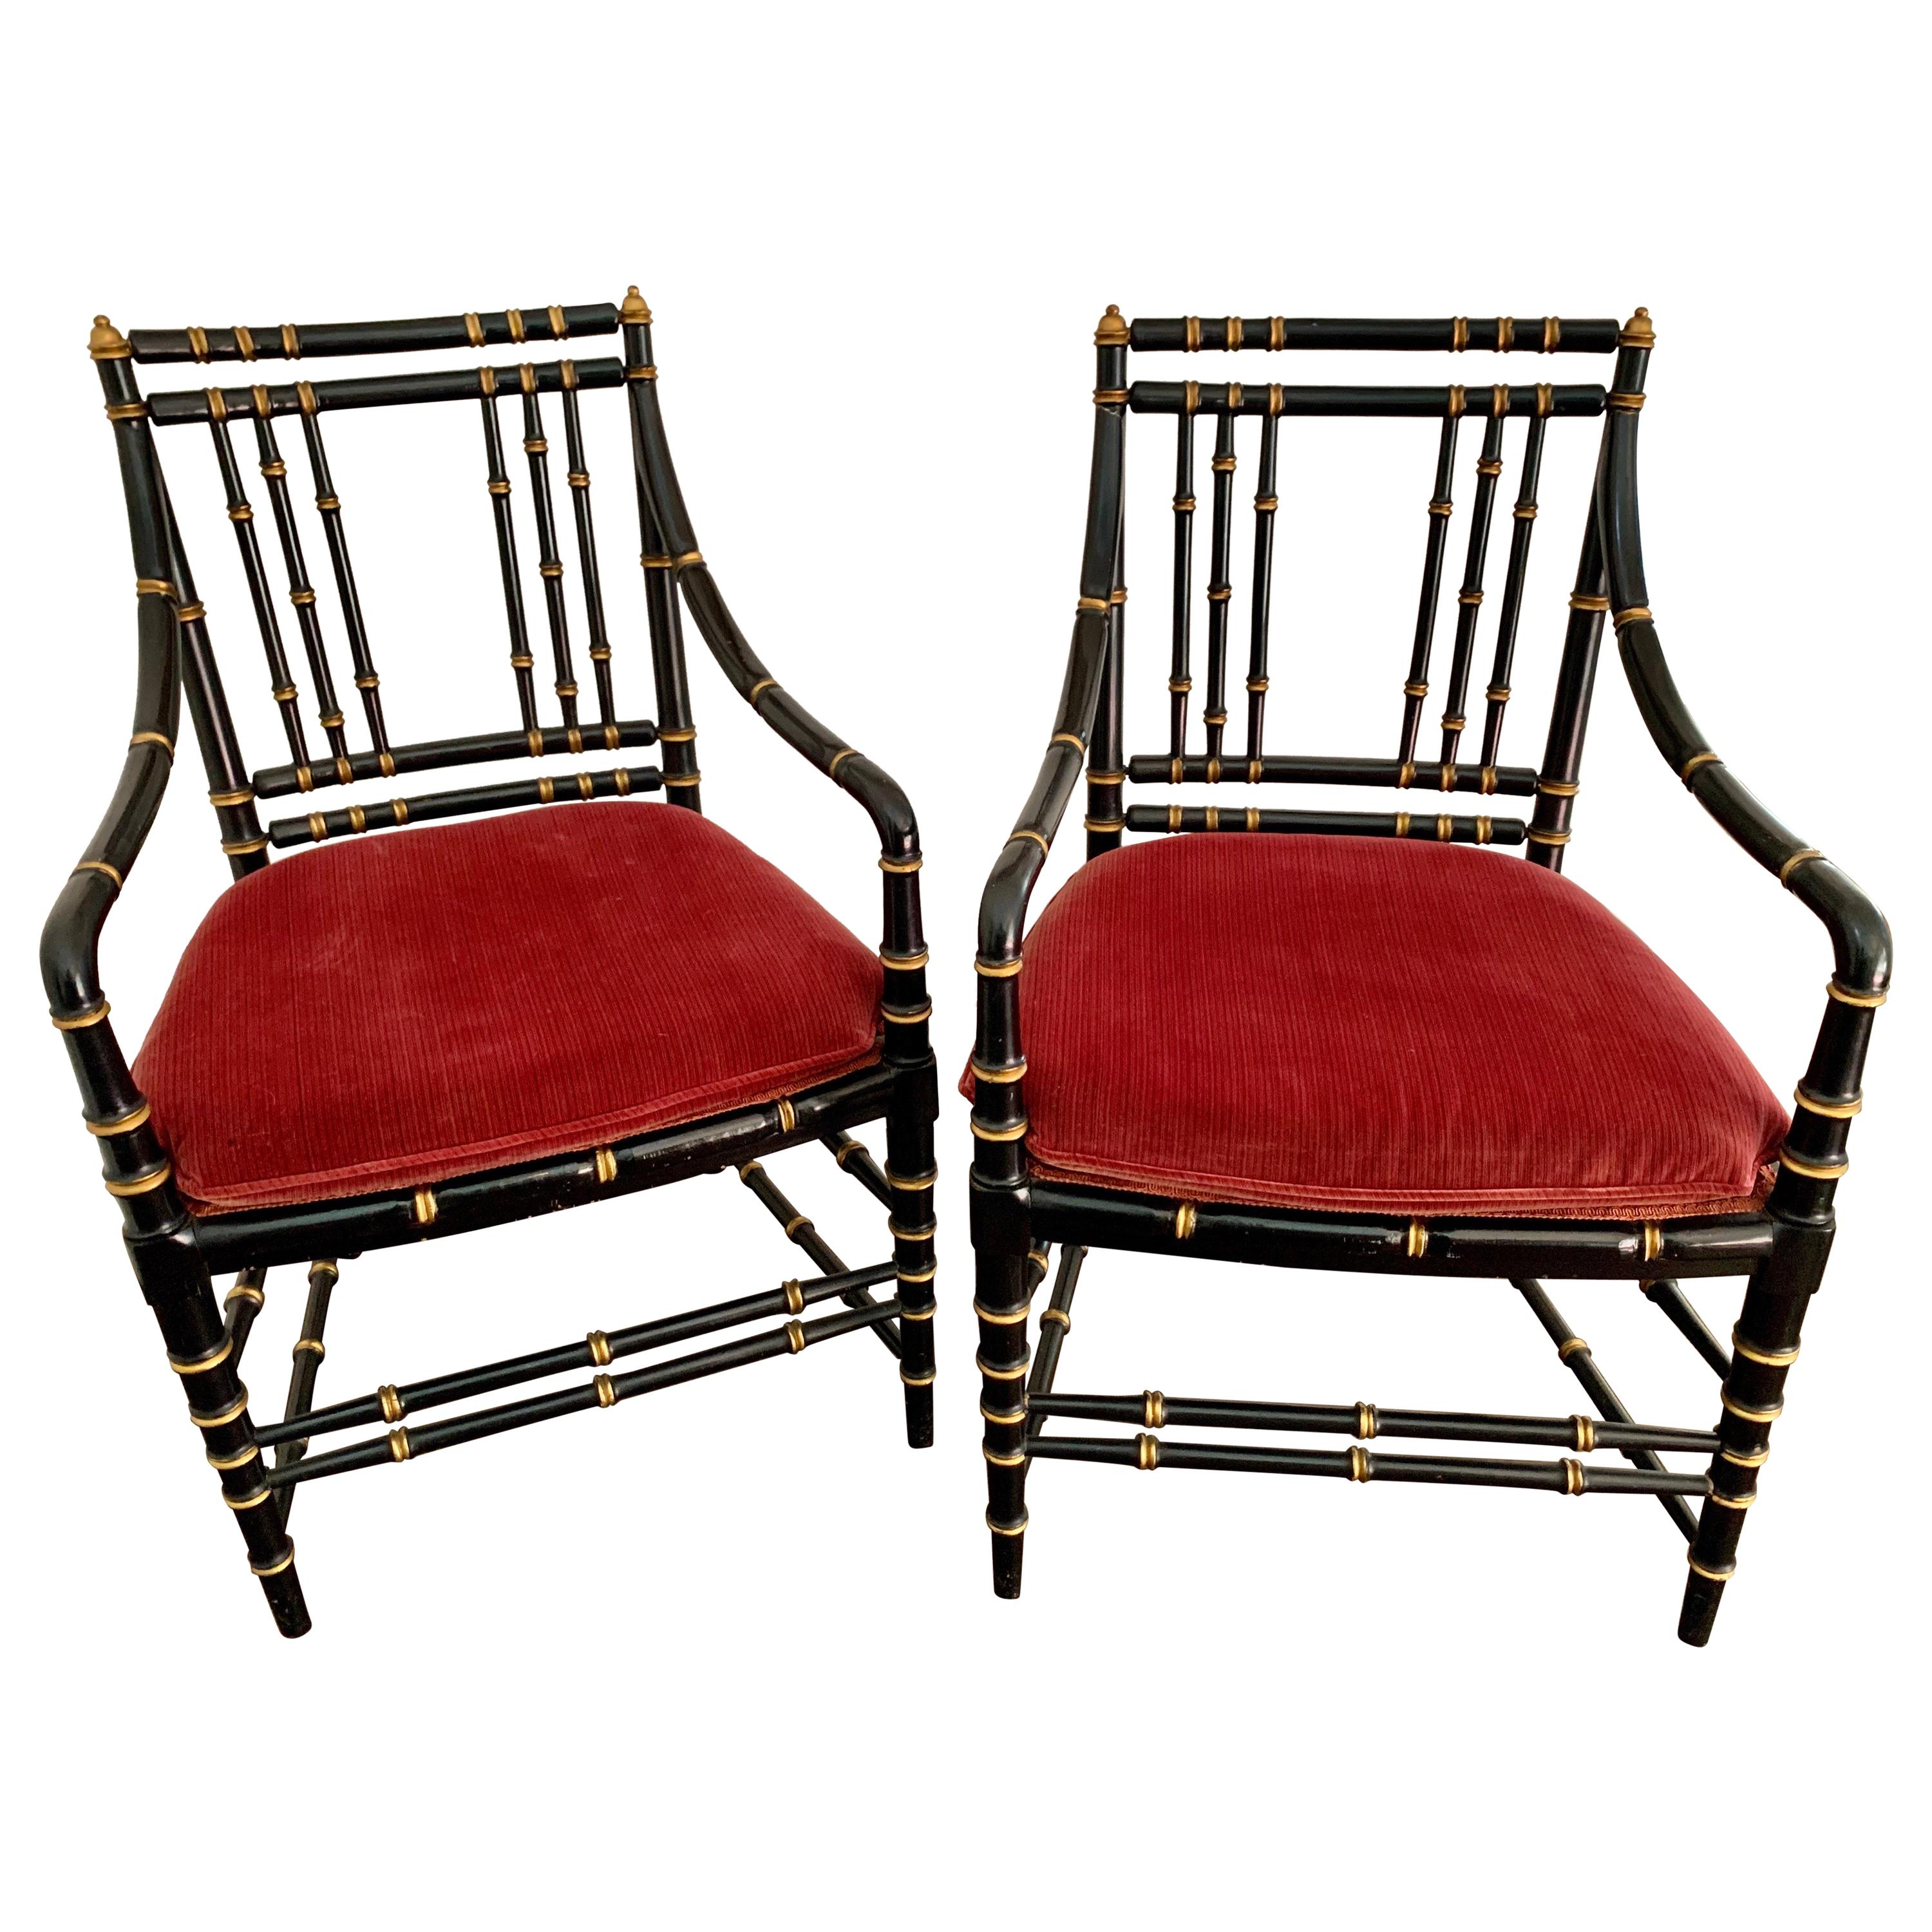 Pair of Antique Chinoiserie Black and Gold Faux Bamboo Chairs